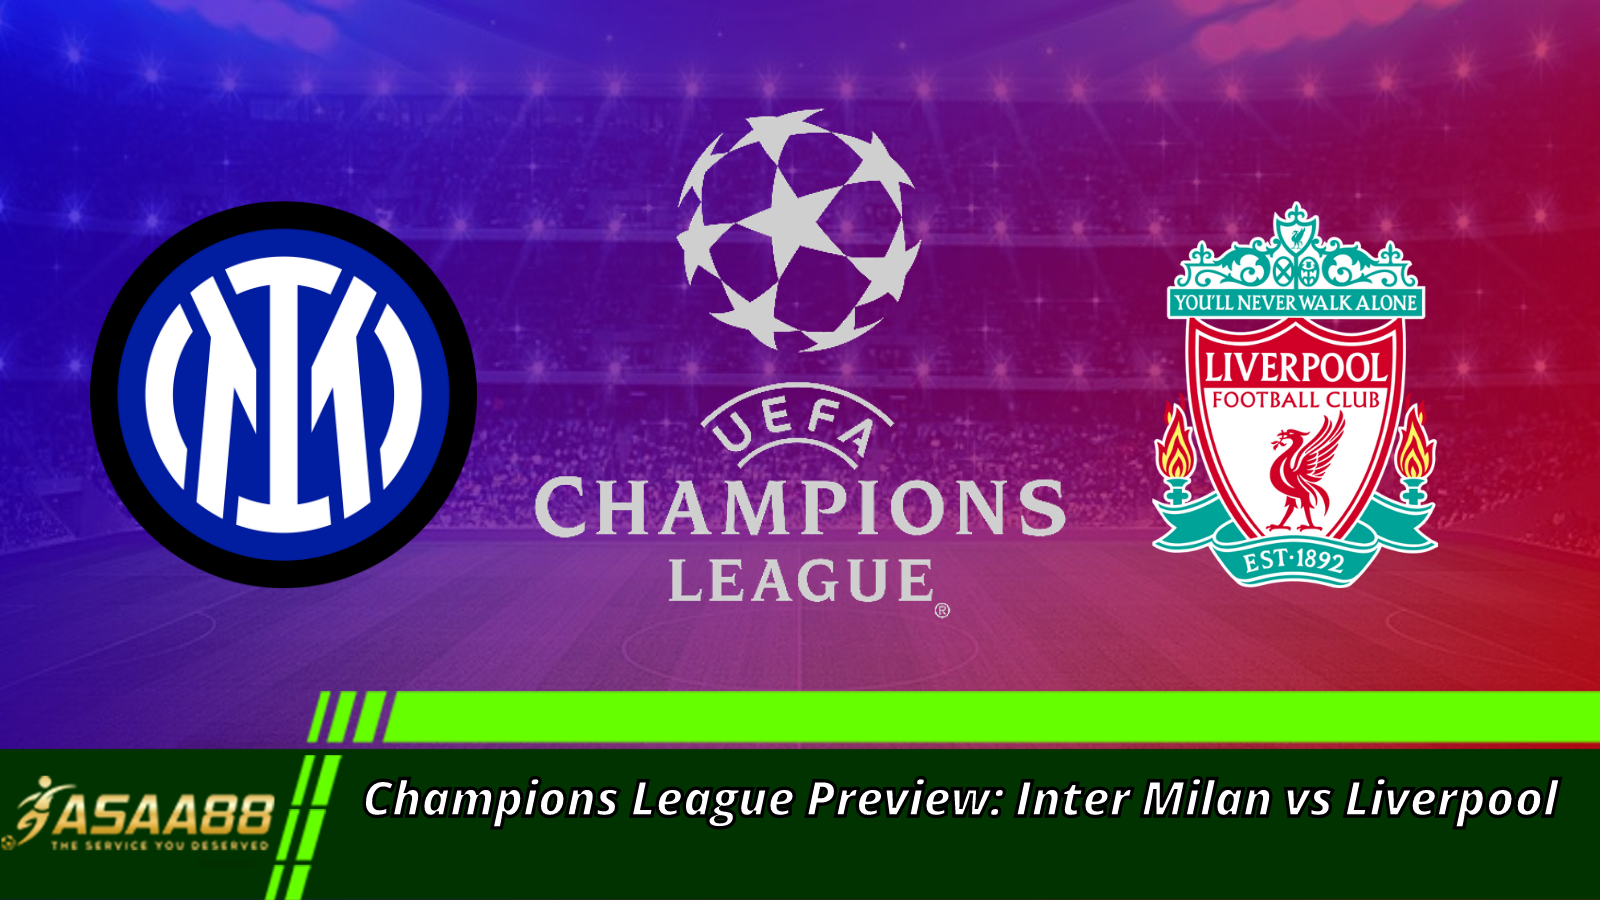 Champions League Preview: Inter Milan vs Liverpool